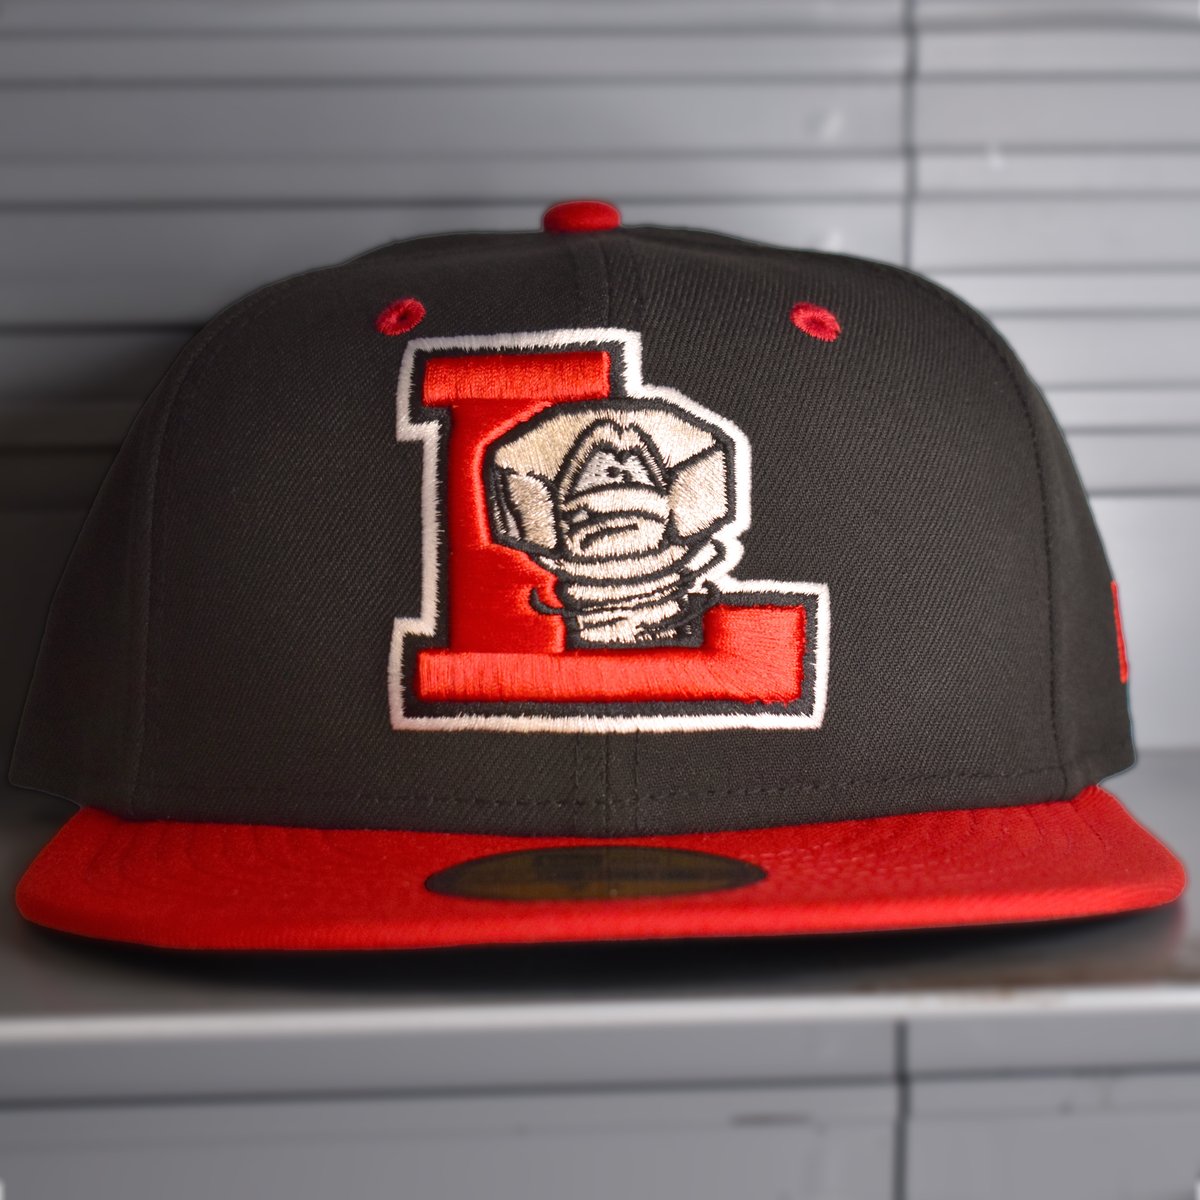 The moment you've all been waiting for... the first hat reveal is here❗️🙊 Now introducing, a blast from the past, unheard of since 2006, the 𝐁𝐥𝐨𝐜𝐤 𝐋❗️ The Lugnuts second official alternate logo beginning with the 2⃣0⃣2⃣4⃣ season❗️🔩 *final hat will be revealed @ 2pm*